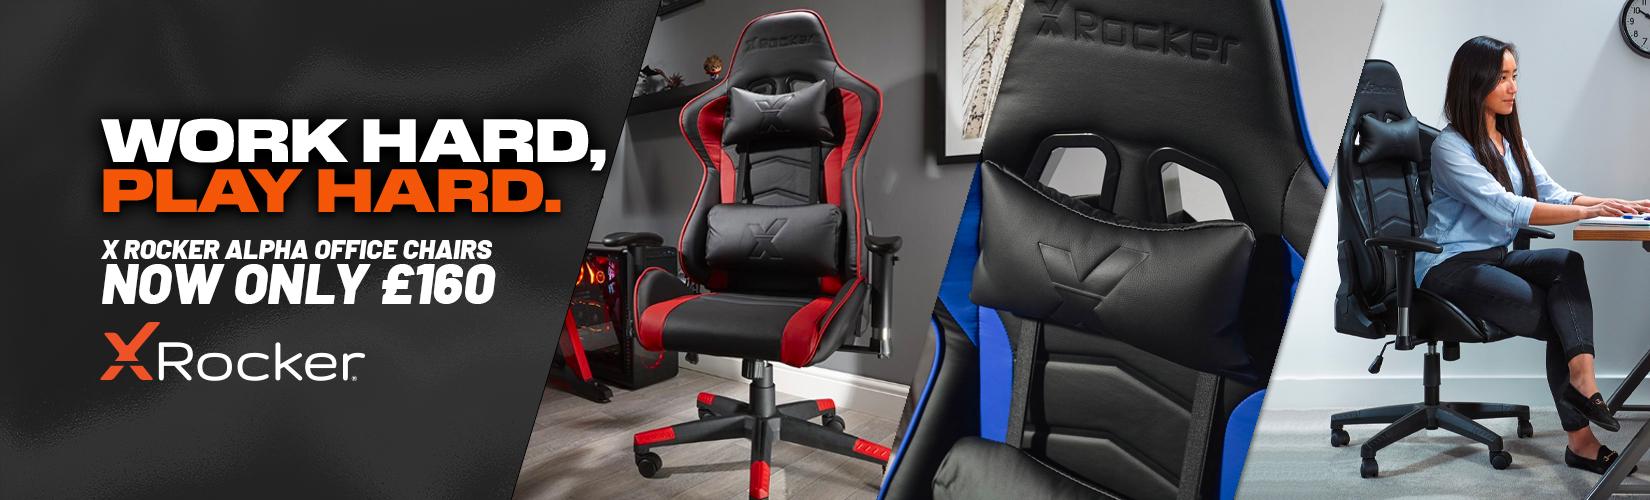 Work hard. Play hard. Xrocker alpha offers chairs. Now only £160.